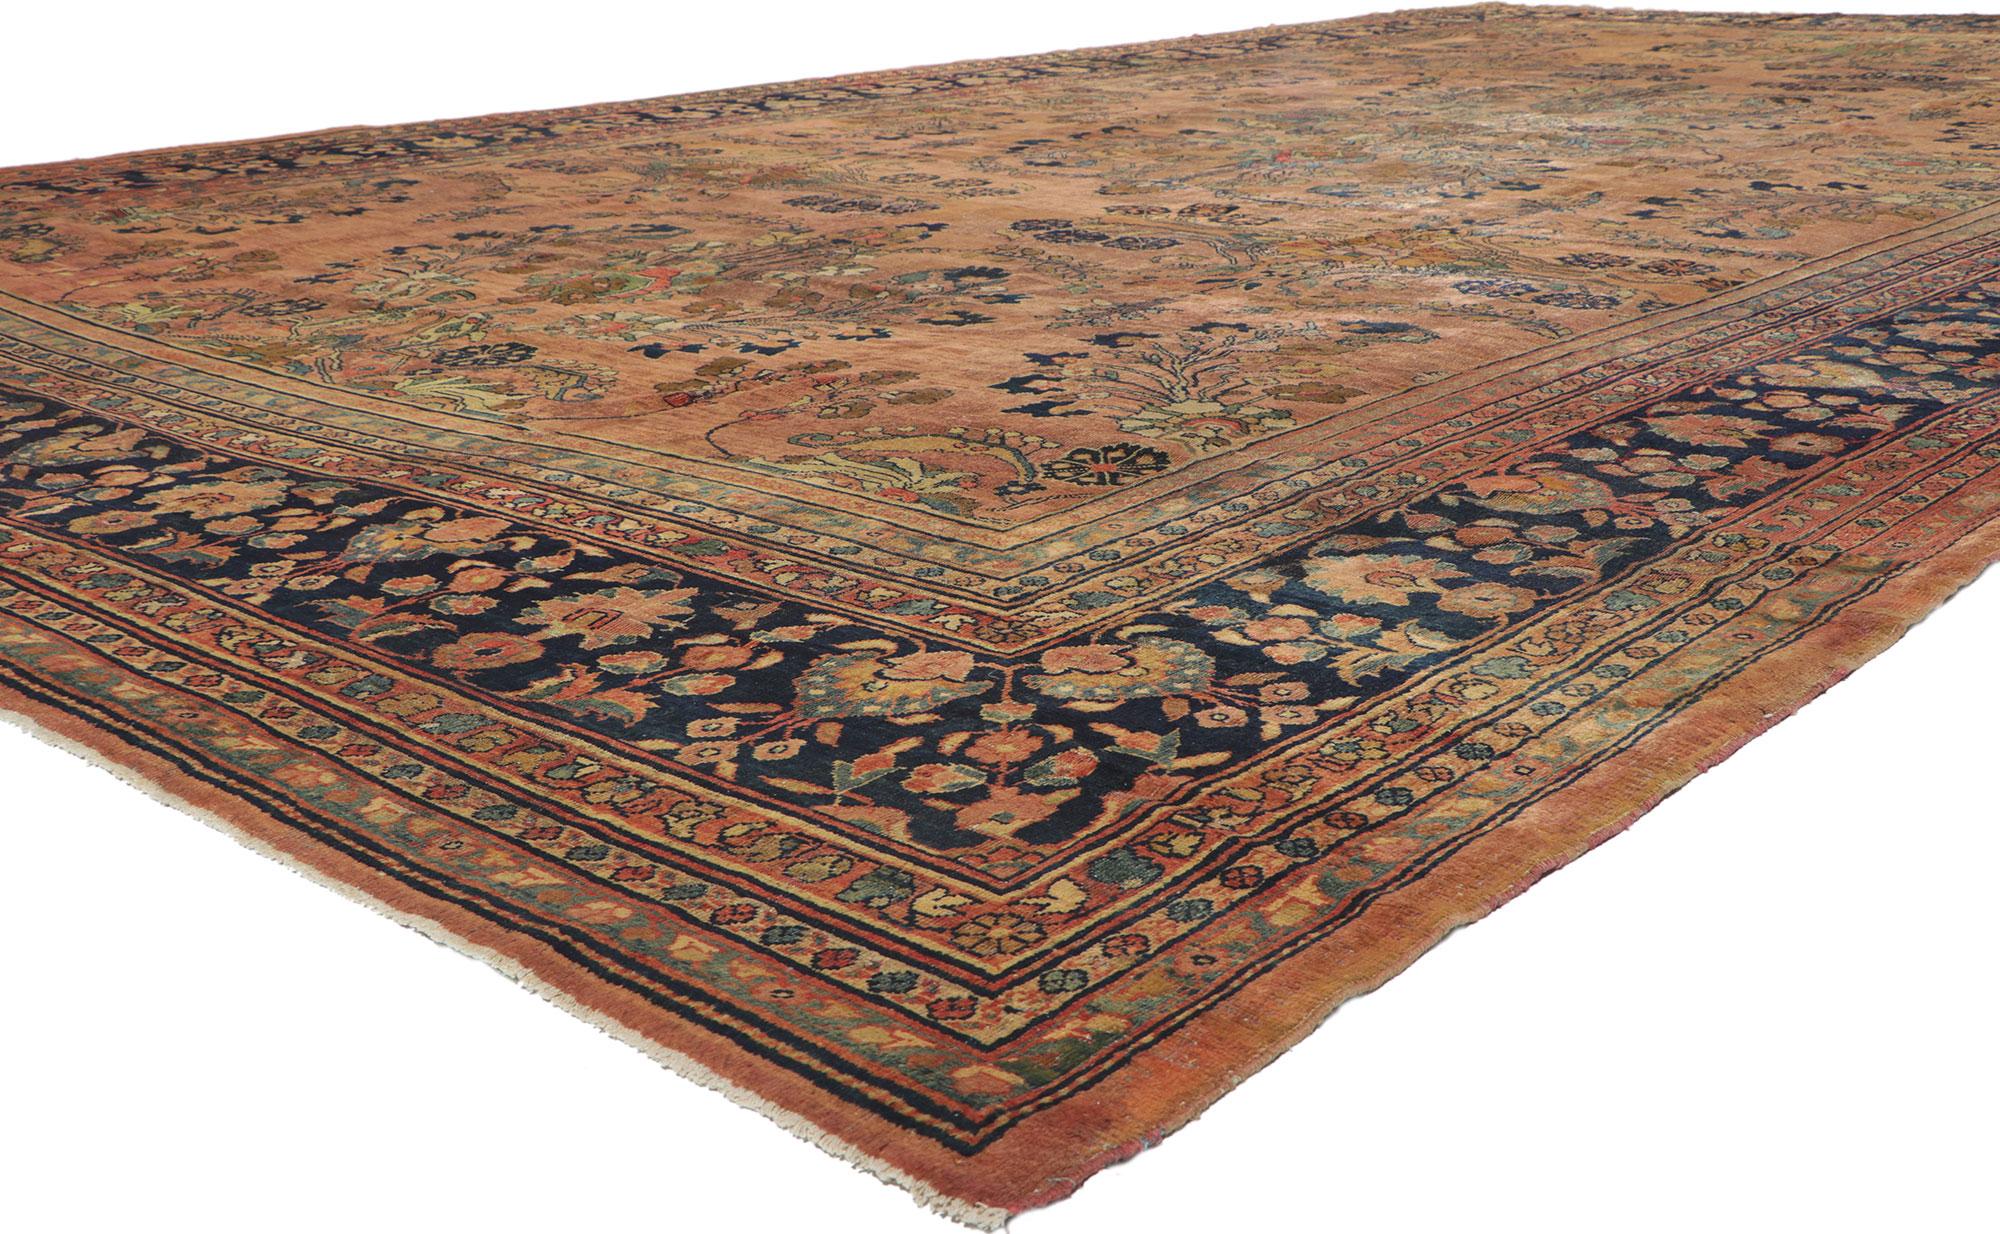 72045 antique Persian Mahal Palace size rug with Art Nouveau style. Brilliant, alluring color pervades this antique Mahal palace size rug, a stunning testament to traditional Persian weaving. This hand-knotted wool antique Persian Mahal palace size